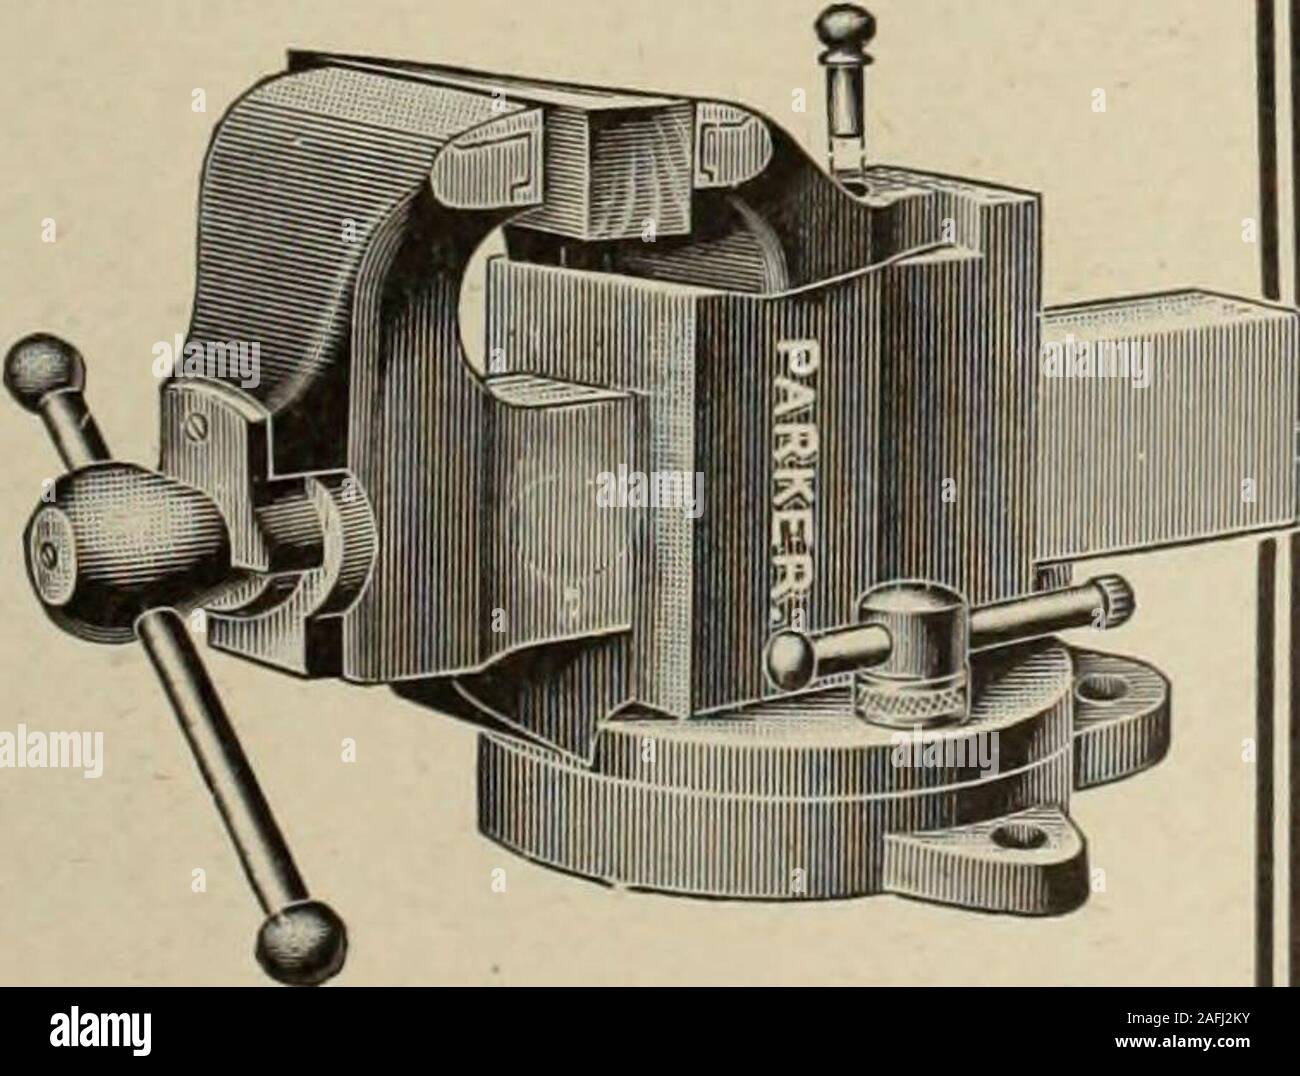 . Canadian machinery and metalworking (January-June 1913). l has addedstrength, solidity, rigidity, elasticityand uniformity. Swaging is farsuperior to rolling, grinding, mill-ing, turning or drawing as a meansof reduction of metal. Send a sample of your work andwell quote the saving by the Lay-ton way. Excelsior Needle Co. Torrington, Conn., U.S.A. Coventry Swaging Co., Ltd.,White Friars Lane, Coven-try, England, Agents forGreat Britain. Fen-wick Freres & Co.,8 Rue de Rocroy,Paris, Franee, Agents for France,Italy, Belgium, Spain, Portugal, and Switzerland. By One Motion By one motion of eithe Stock Photo